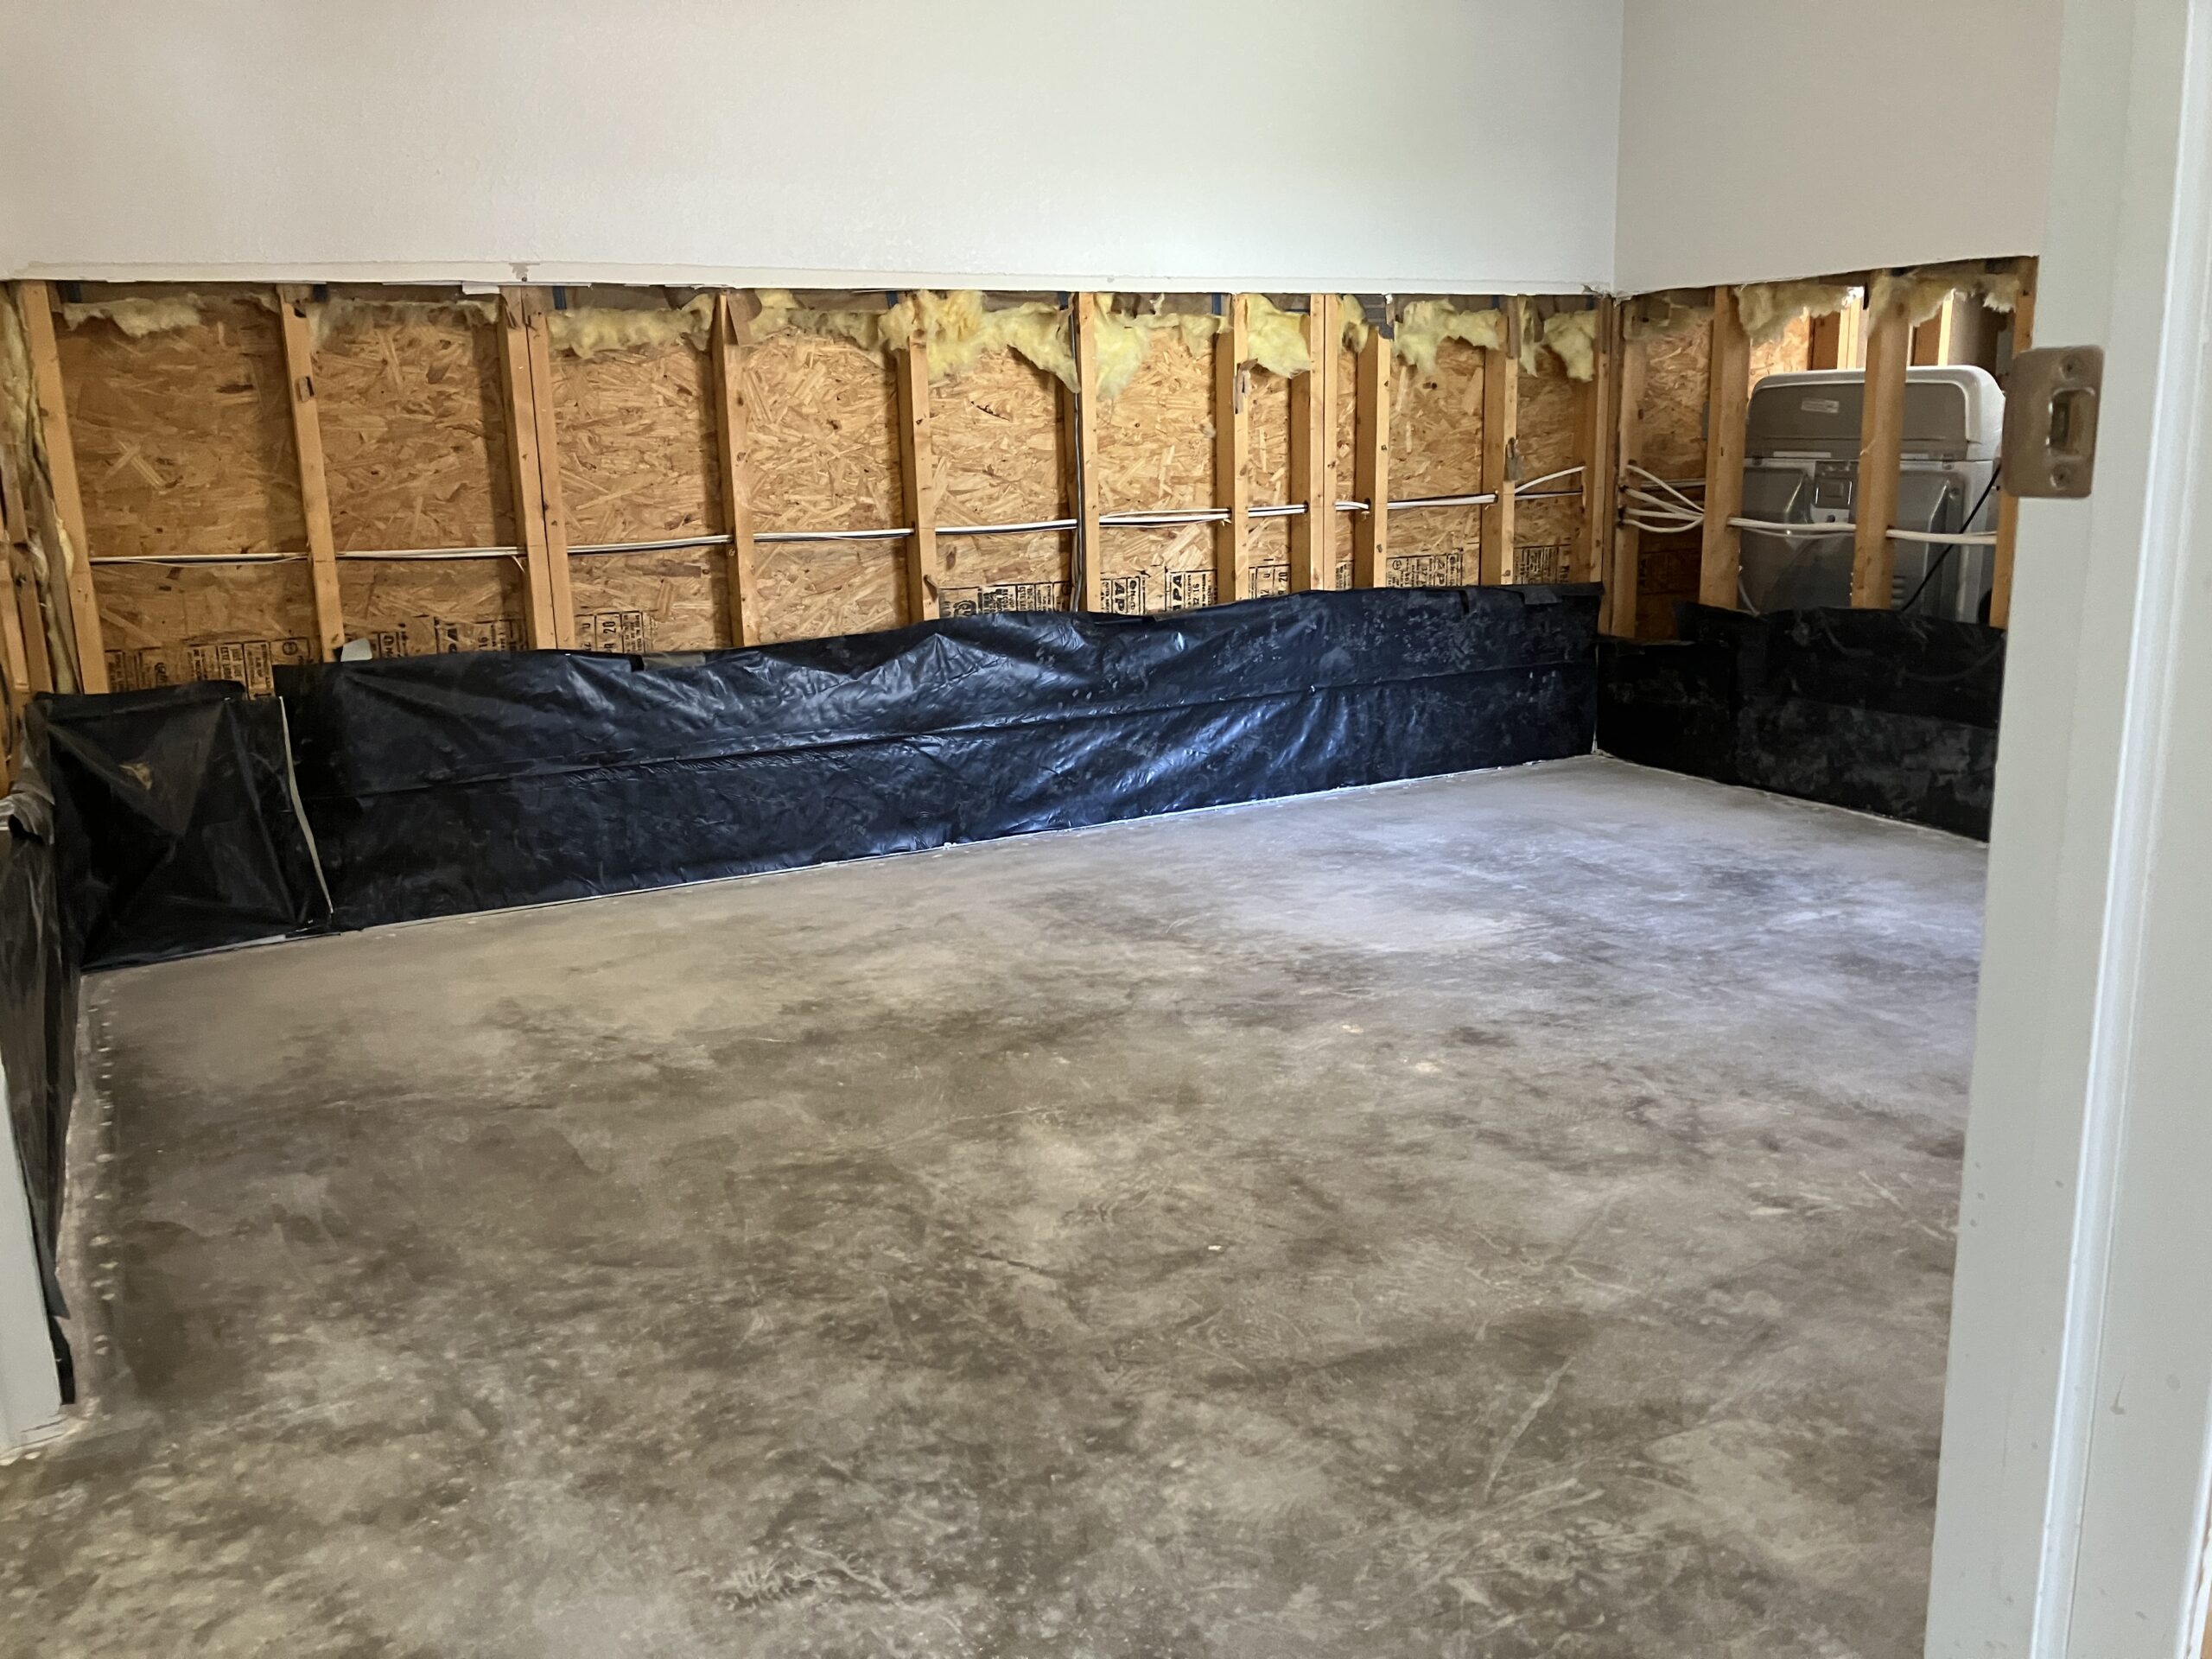 Damage left in the wake of Hurricane Ian – carpets and plank flooring entirely stripped away